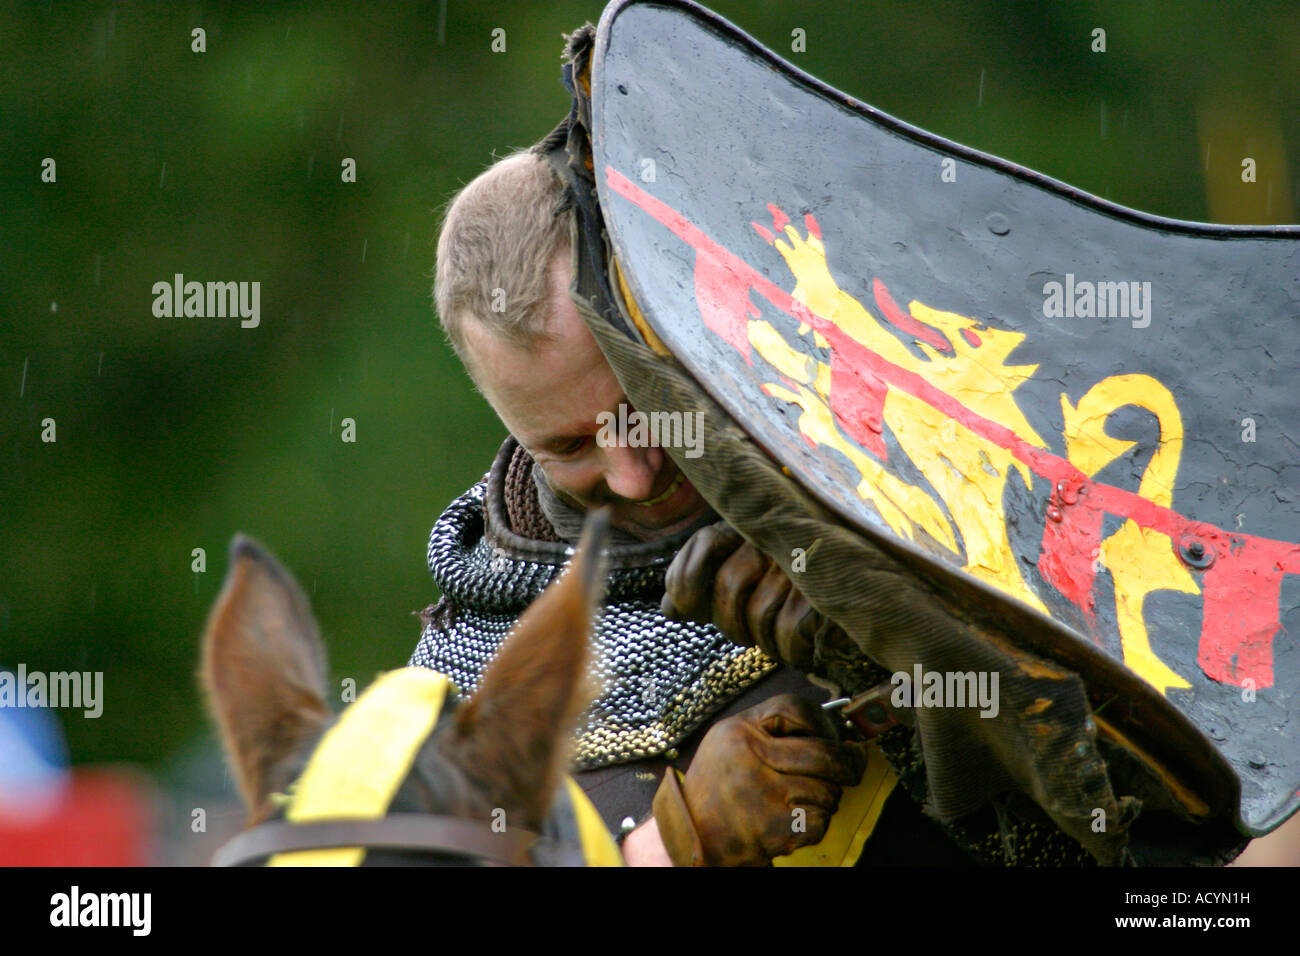 The Black knight during the Robin Hood Pageant at Nottingham Castle City of Nottingham East Midlands UK. The joust is one of the highlights of the annual celebration of Notttinghams most famous hero Oh yes, its raining... Stock Photo